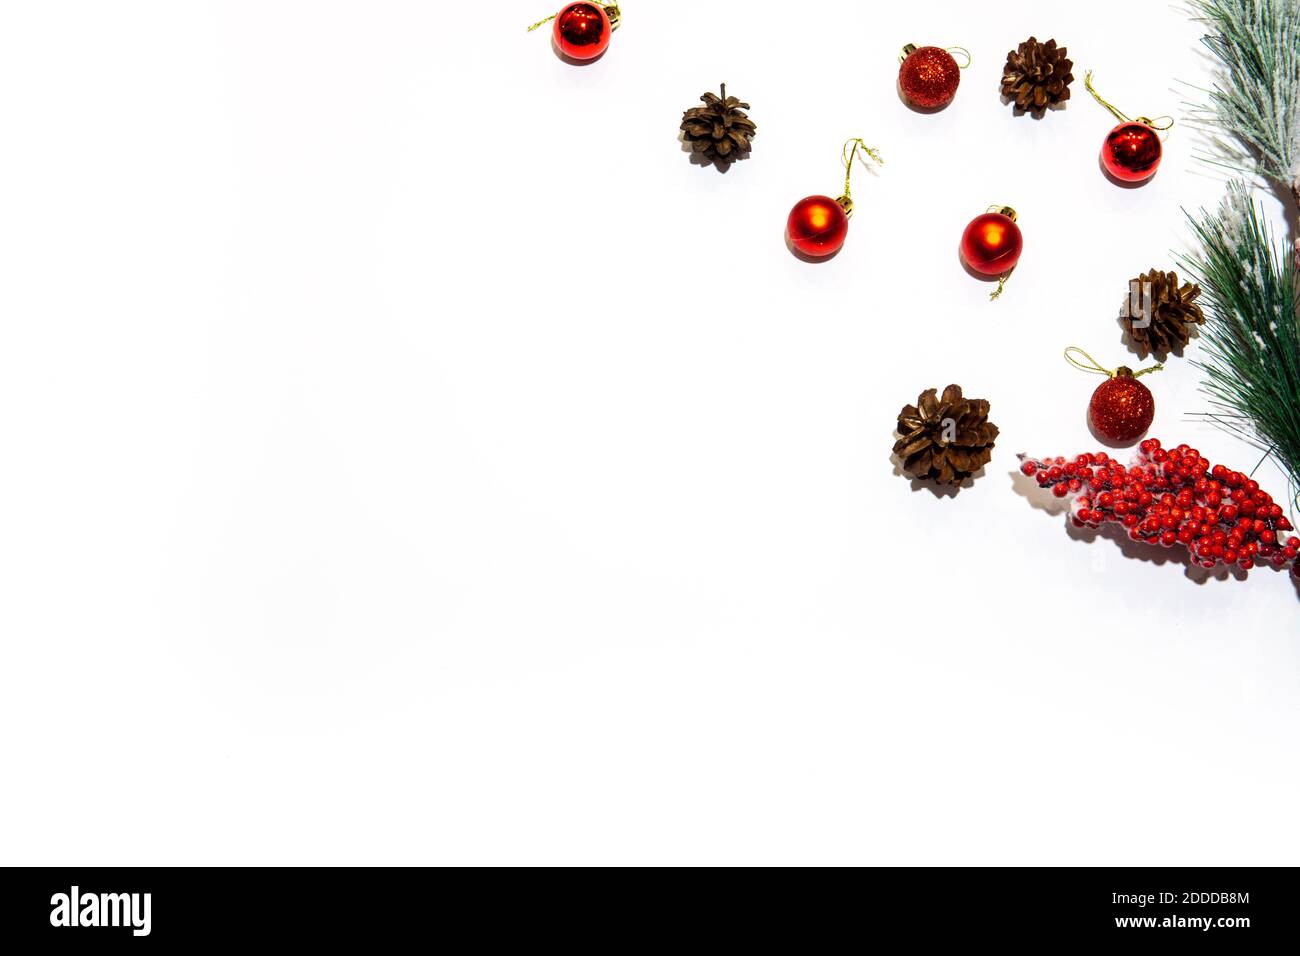 Christmas composition. Red decorations with pines on white background. Christmas, winter, new year concept. Flat lay. Stock Photo